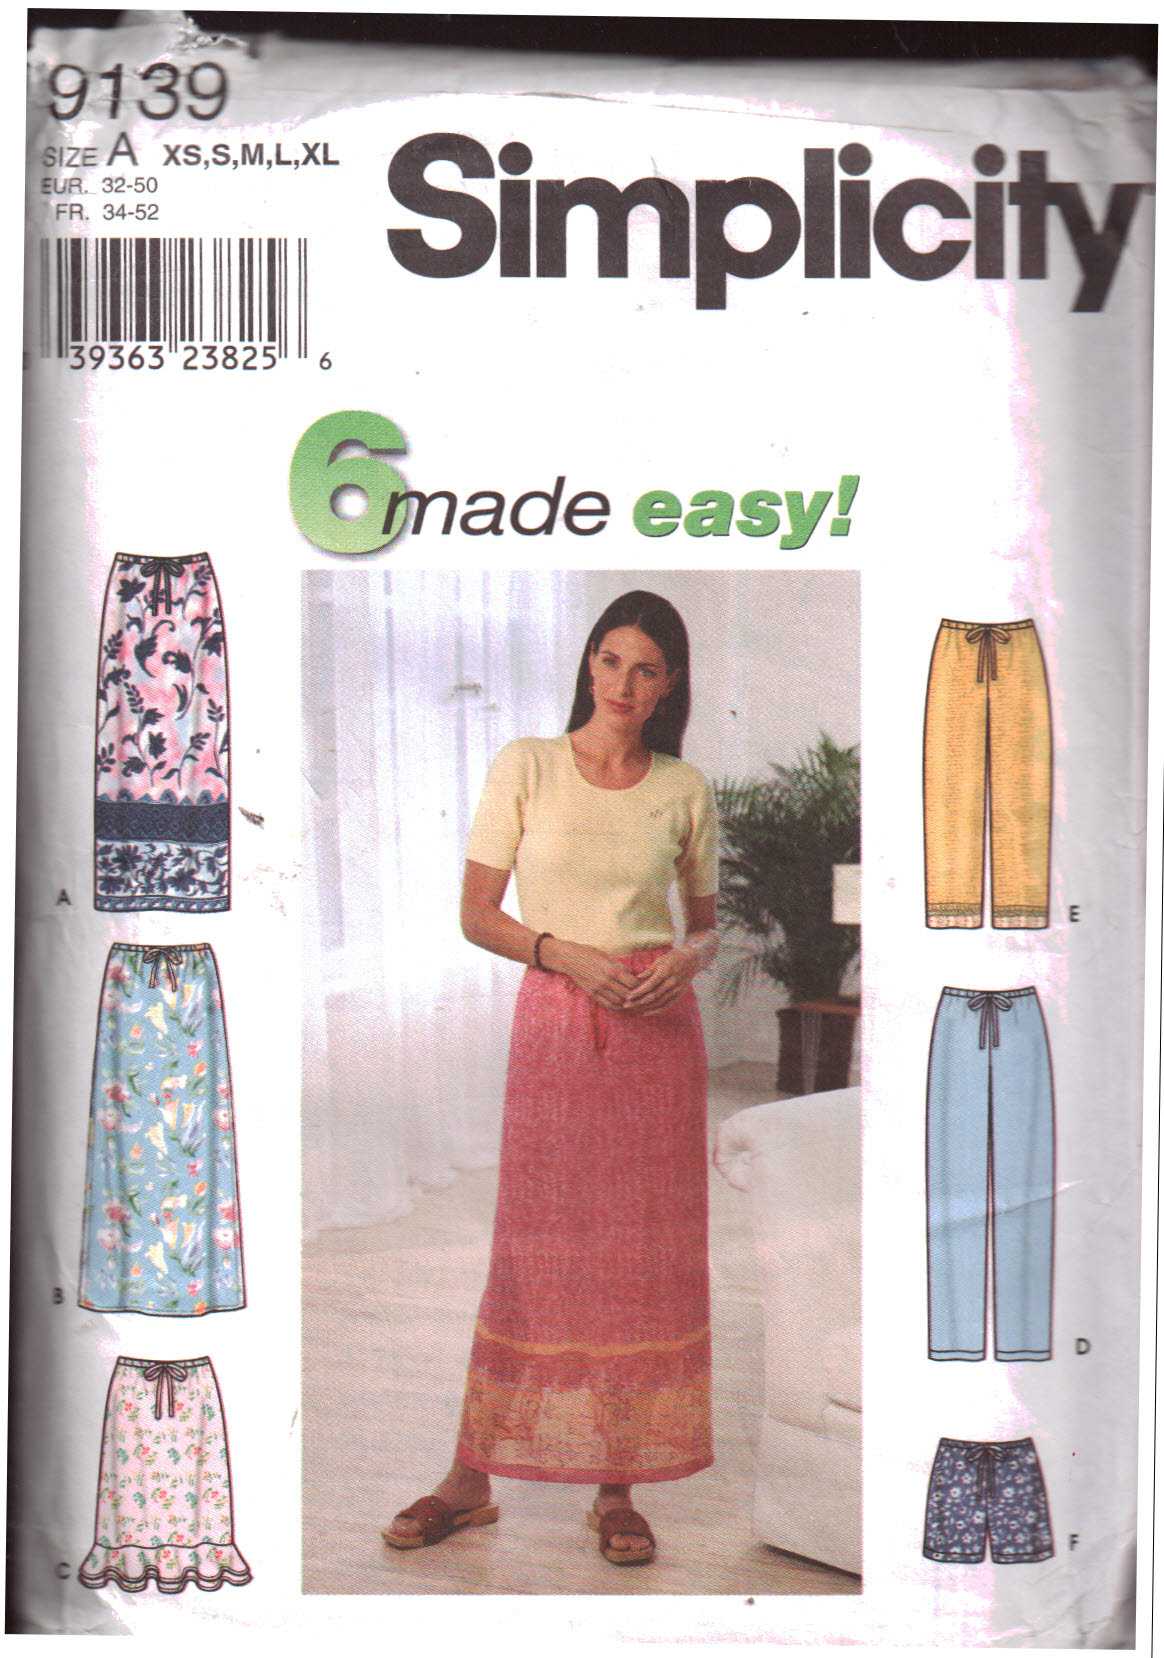 Simplicity #9139 OOP 6 made easy Skirts or Pants & Shorts Pattern Sz Xs-XL UC 